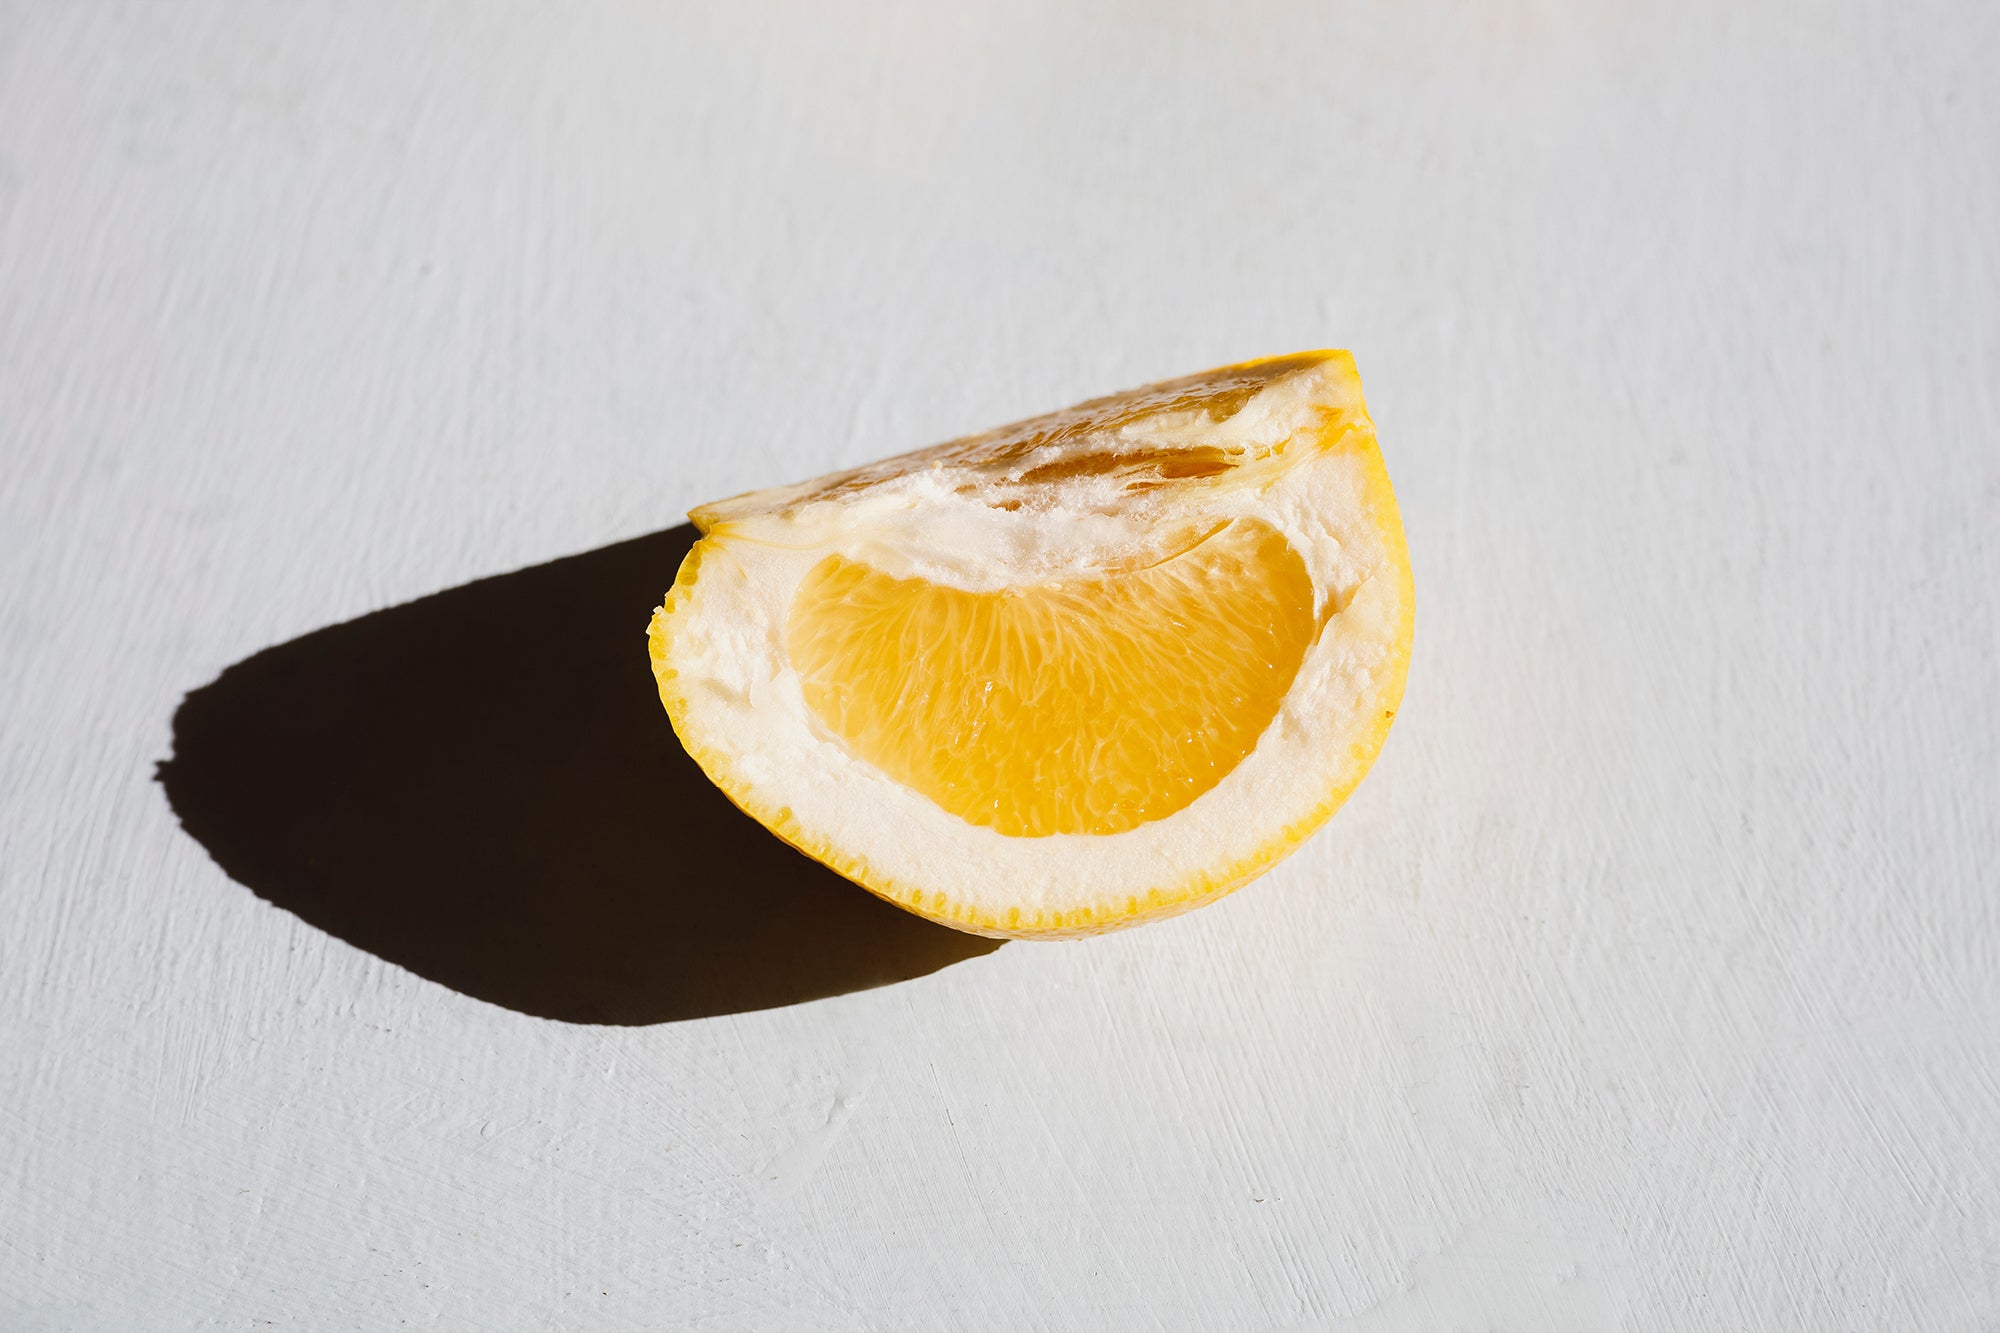 Orange slice casting a shadow on a white background.